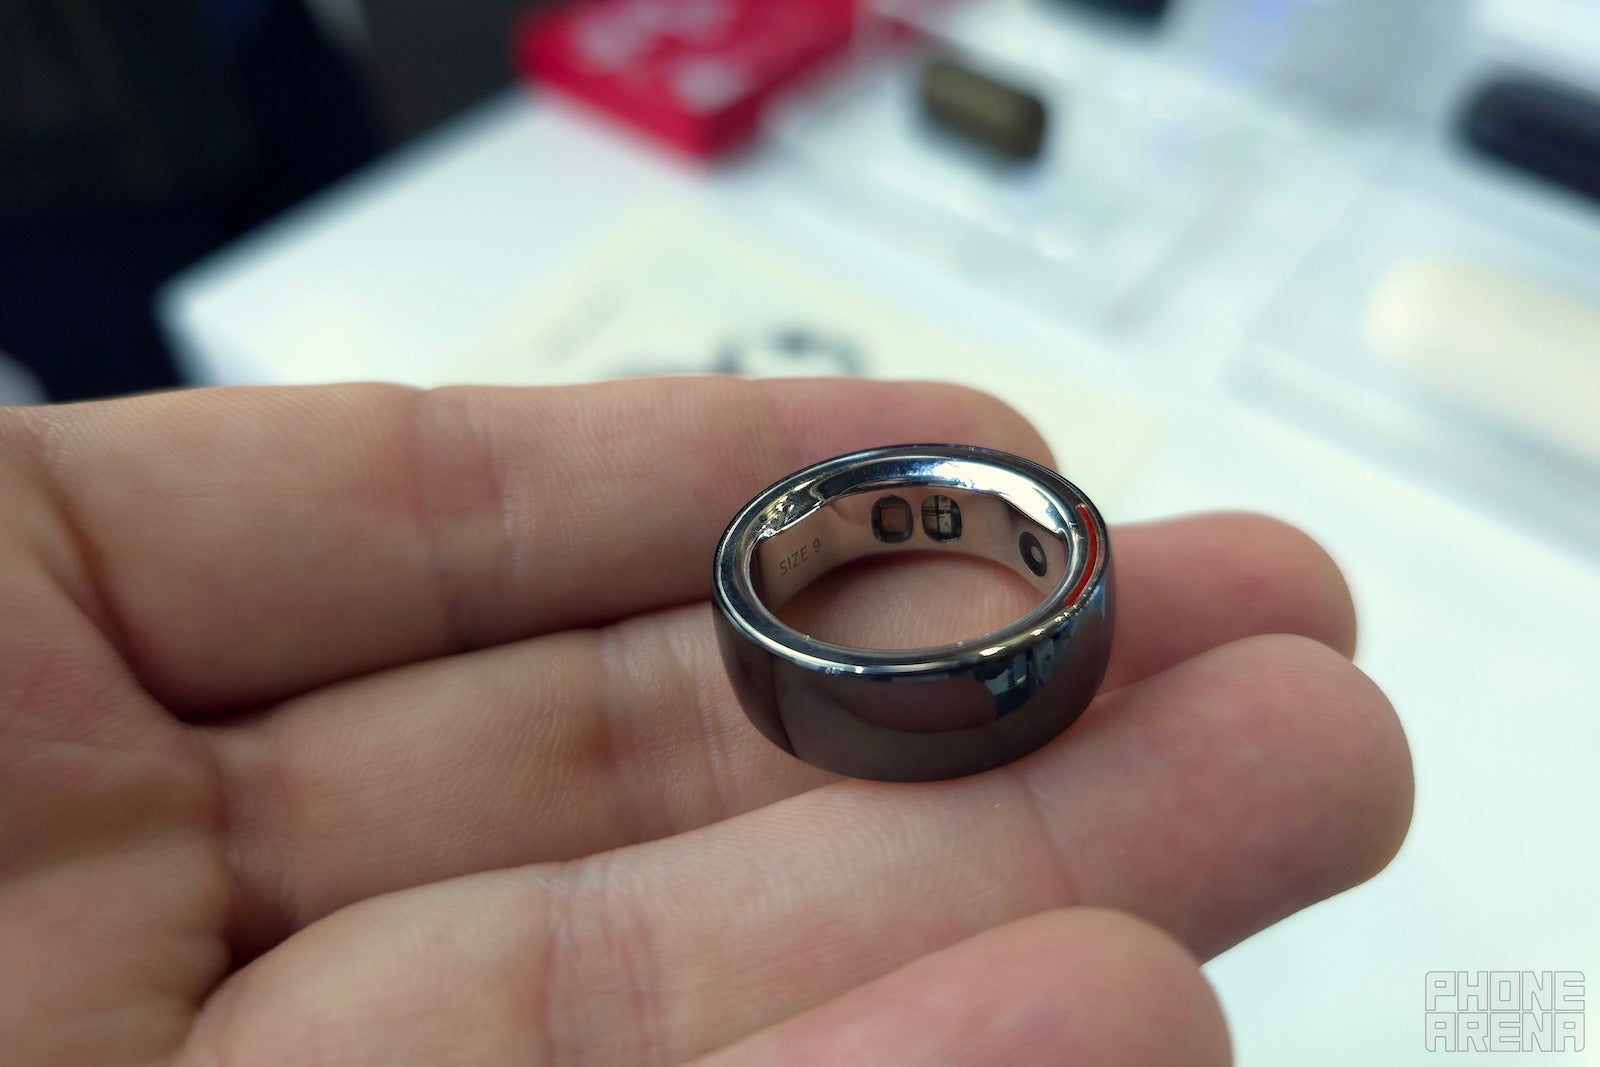 MWC surprises: here's a smart ring you can actually buy